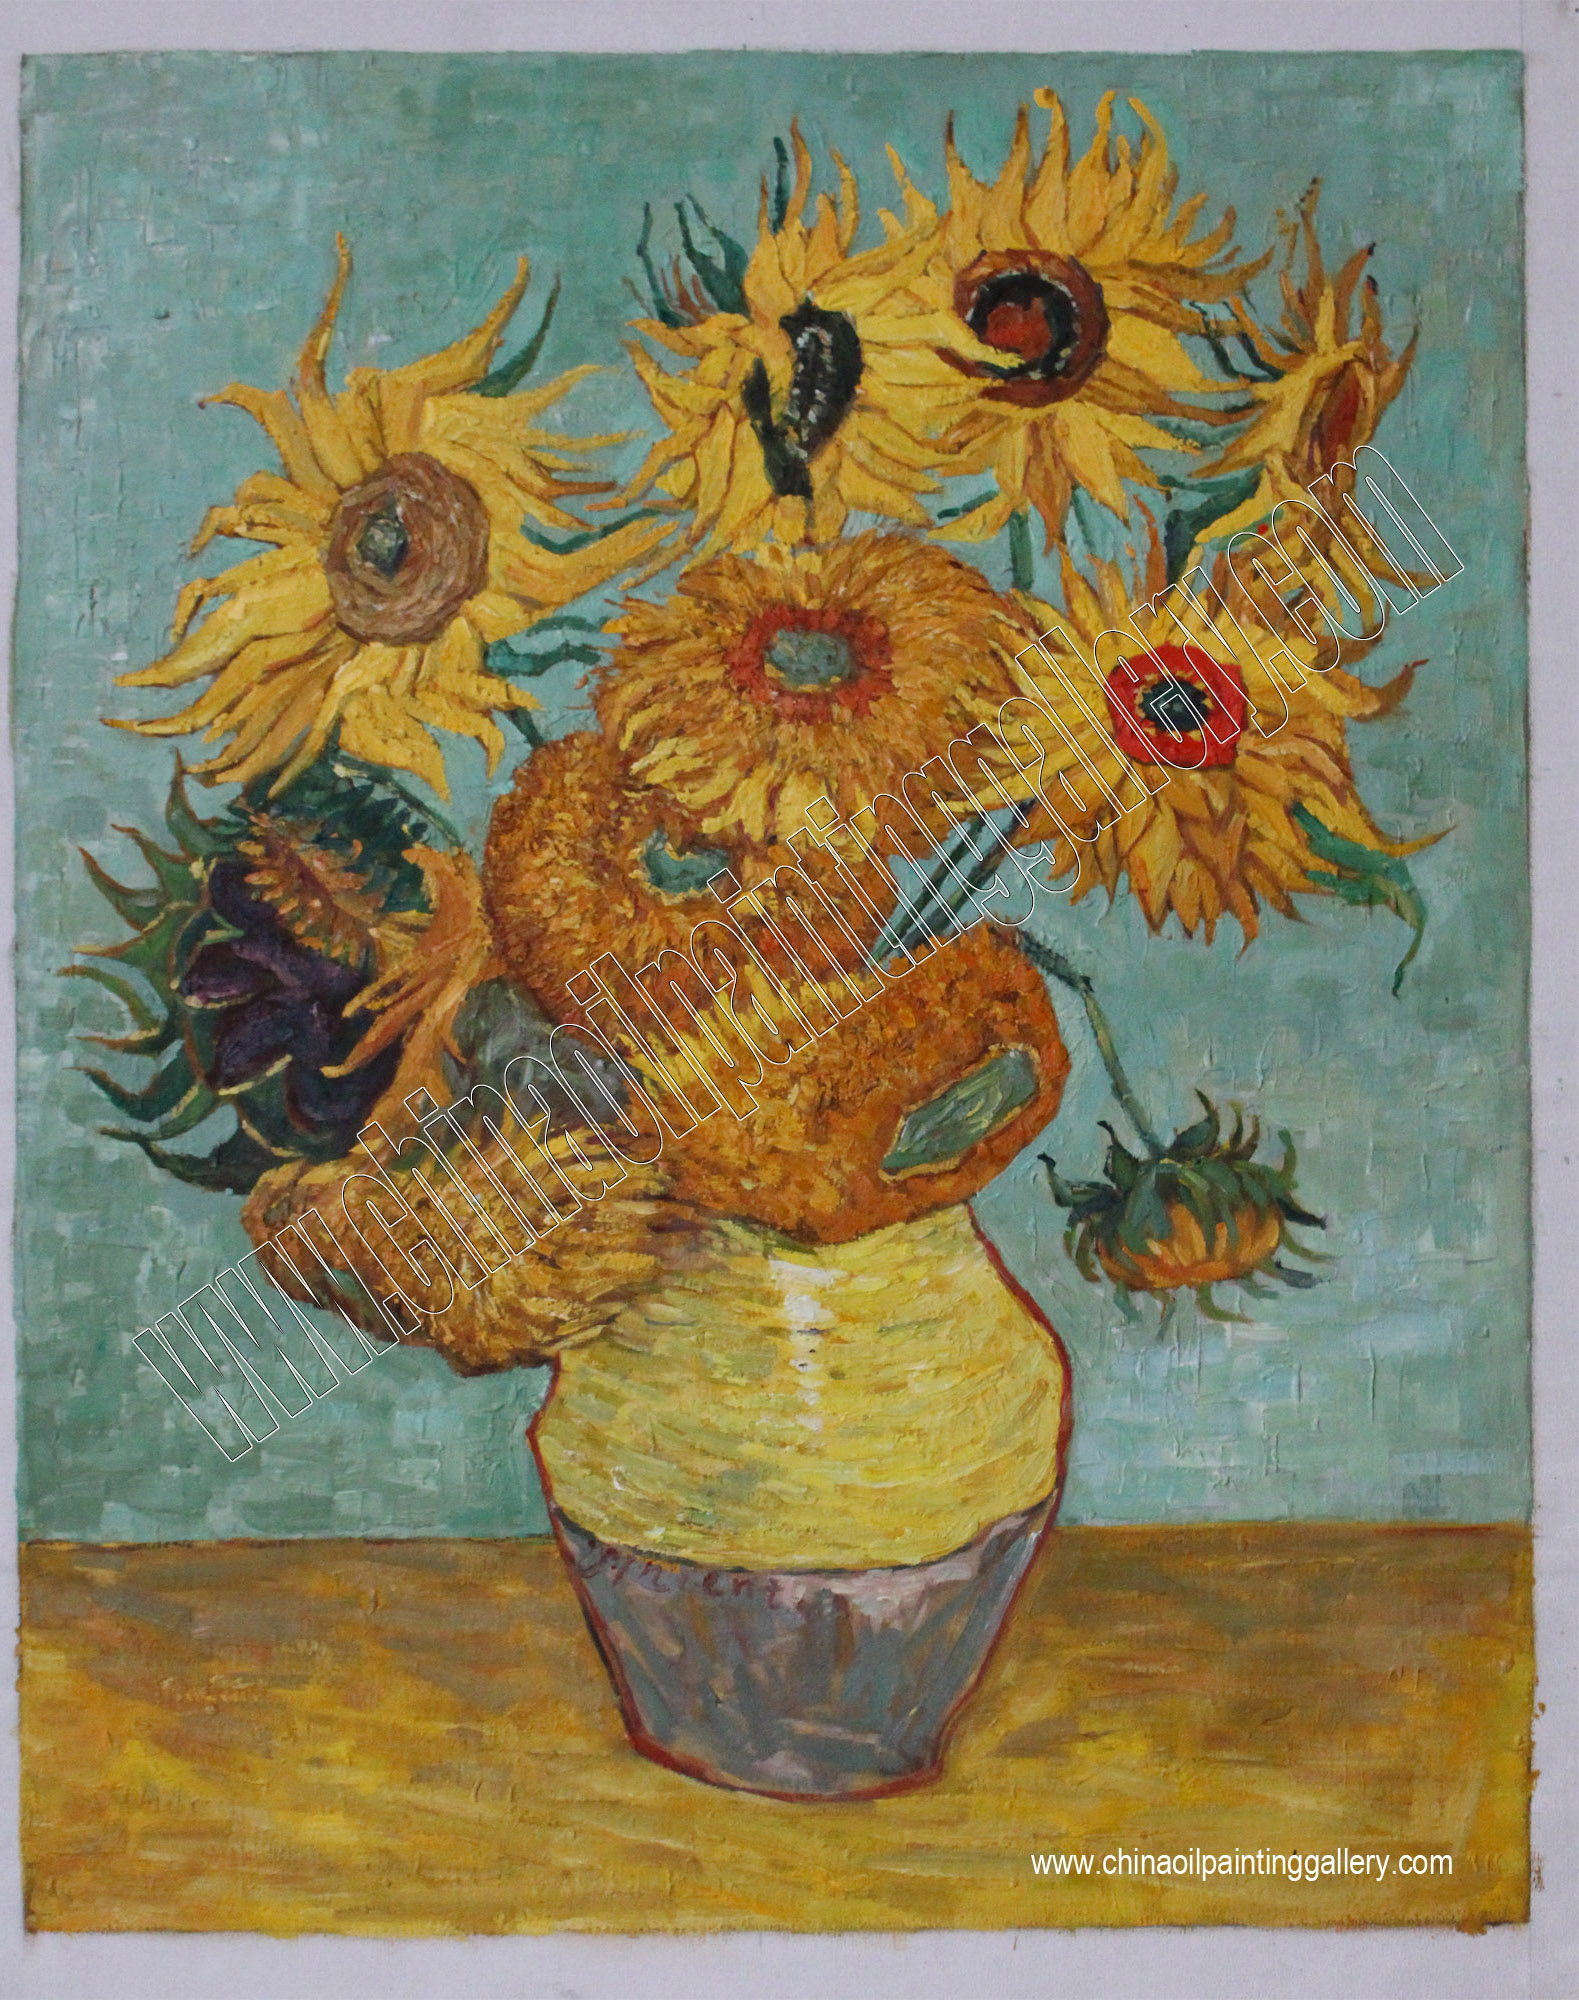 Vincent van Gogh Sunflowers - Oil painting reproductions 3